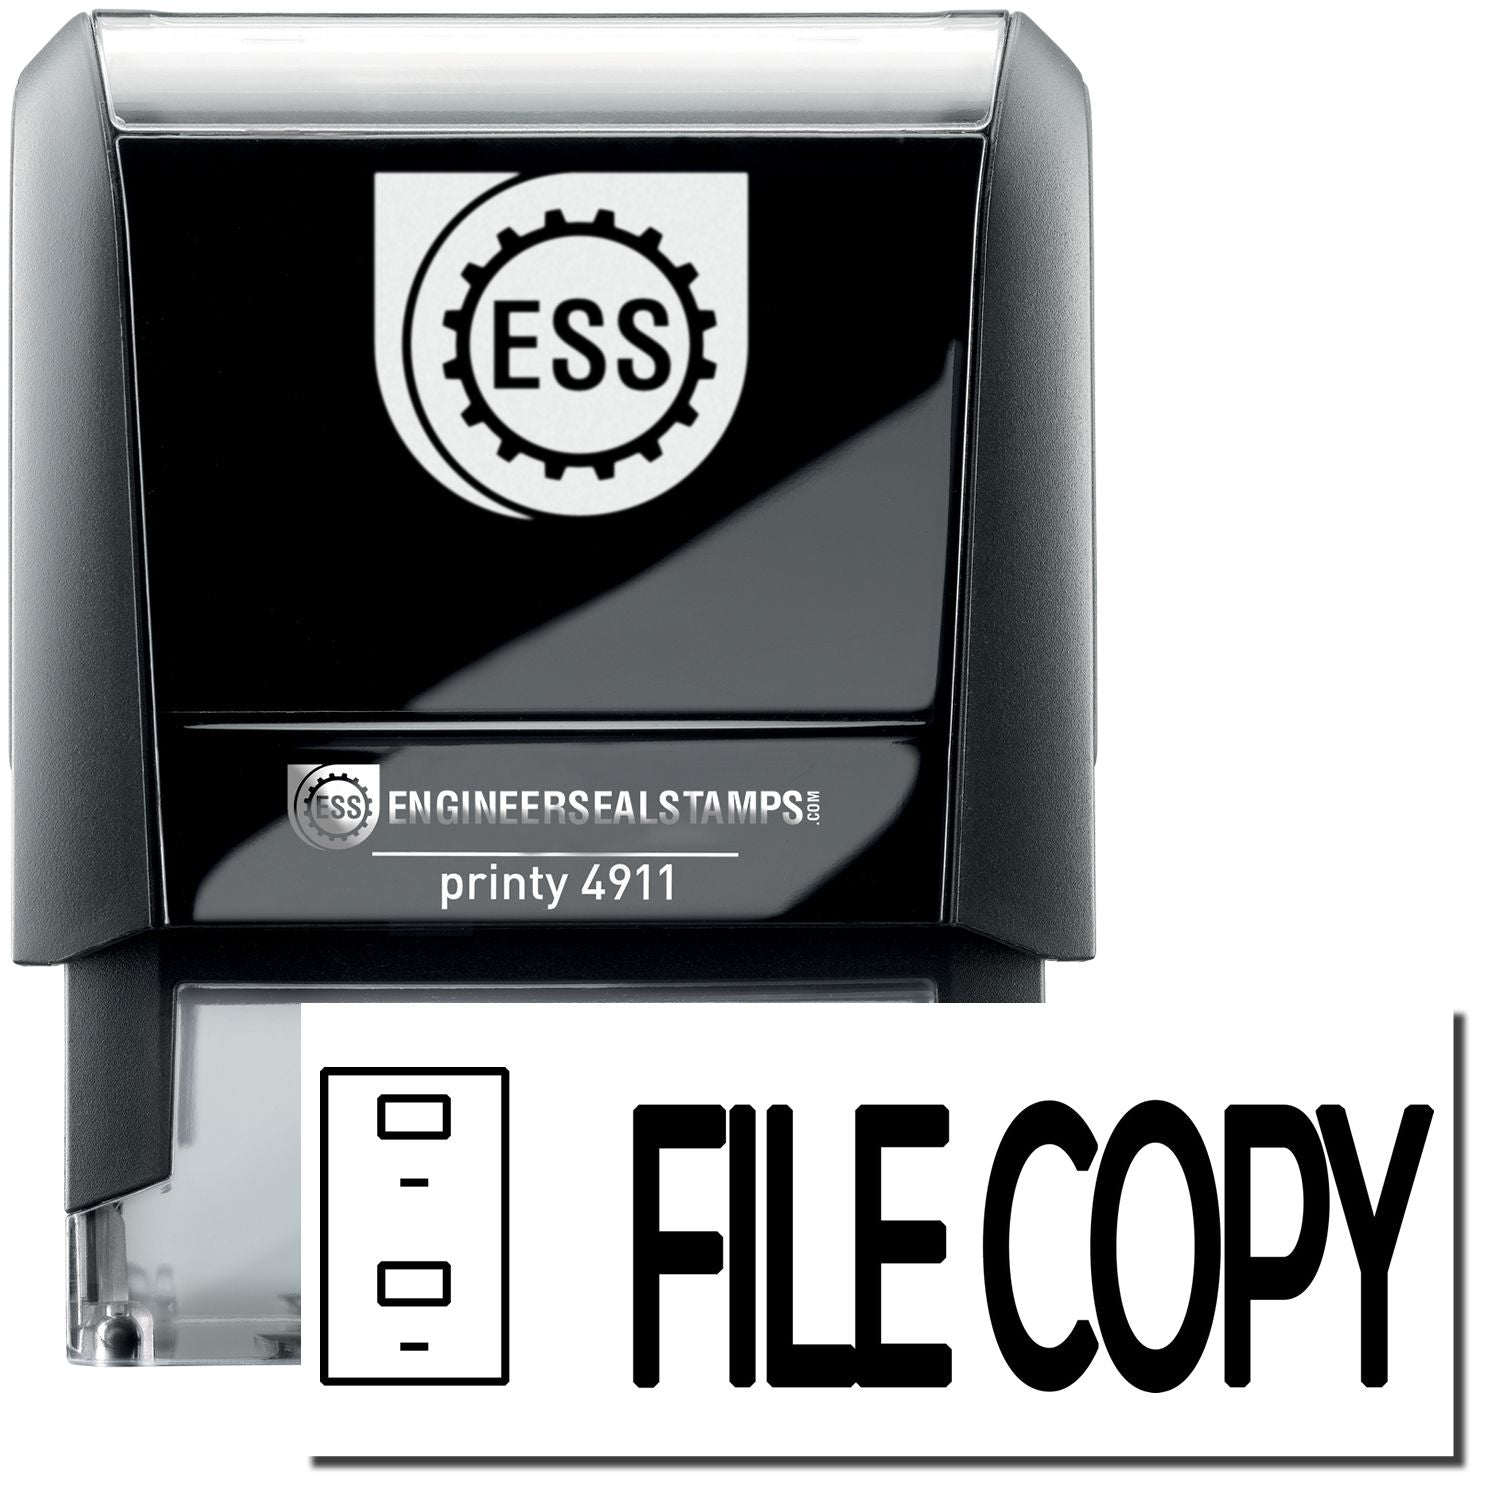 A self-inking stamp with a stamped image showing how the text "FILE COPY" in bold font and a small image of a drawer is displayed after stamping.